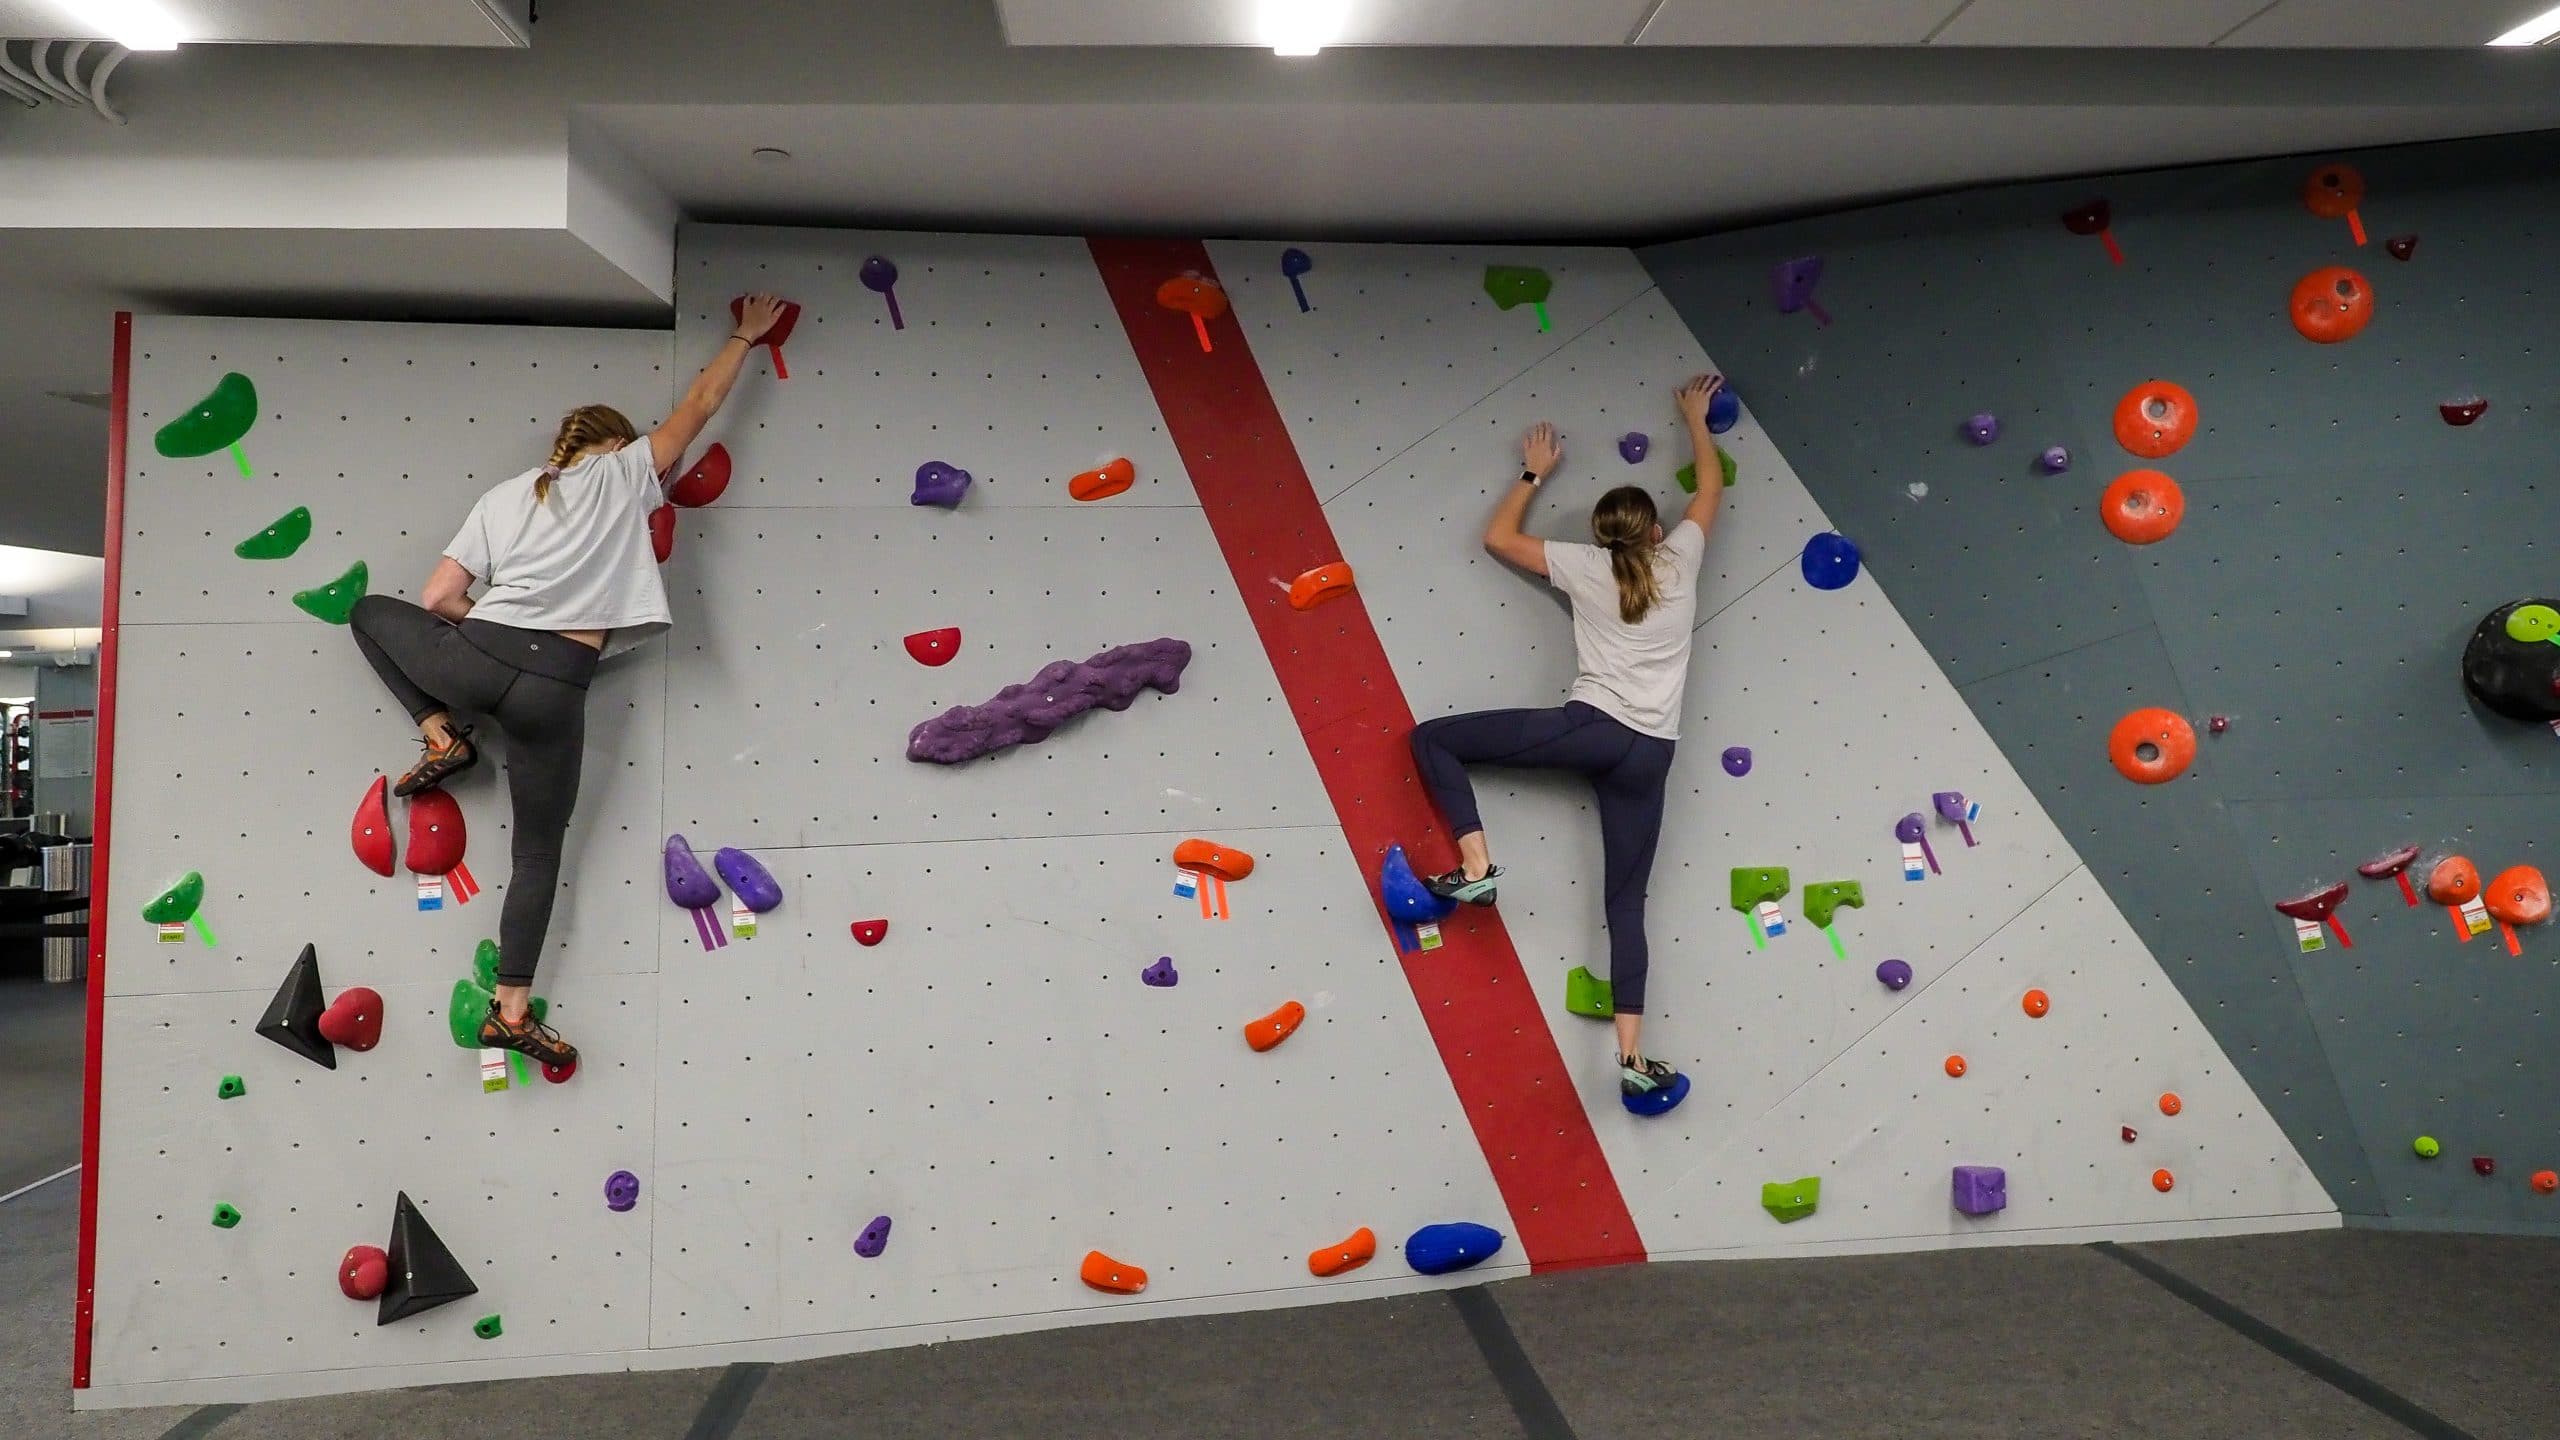 Students practice climbing and bouldering during the COVID-19 pandemic at the newly renovated Carmichael gym.